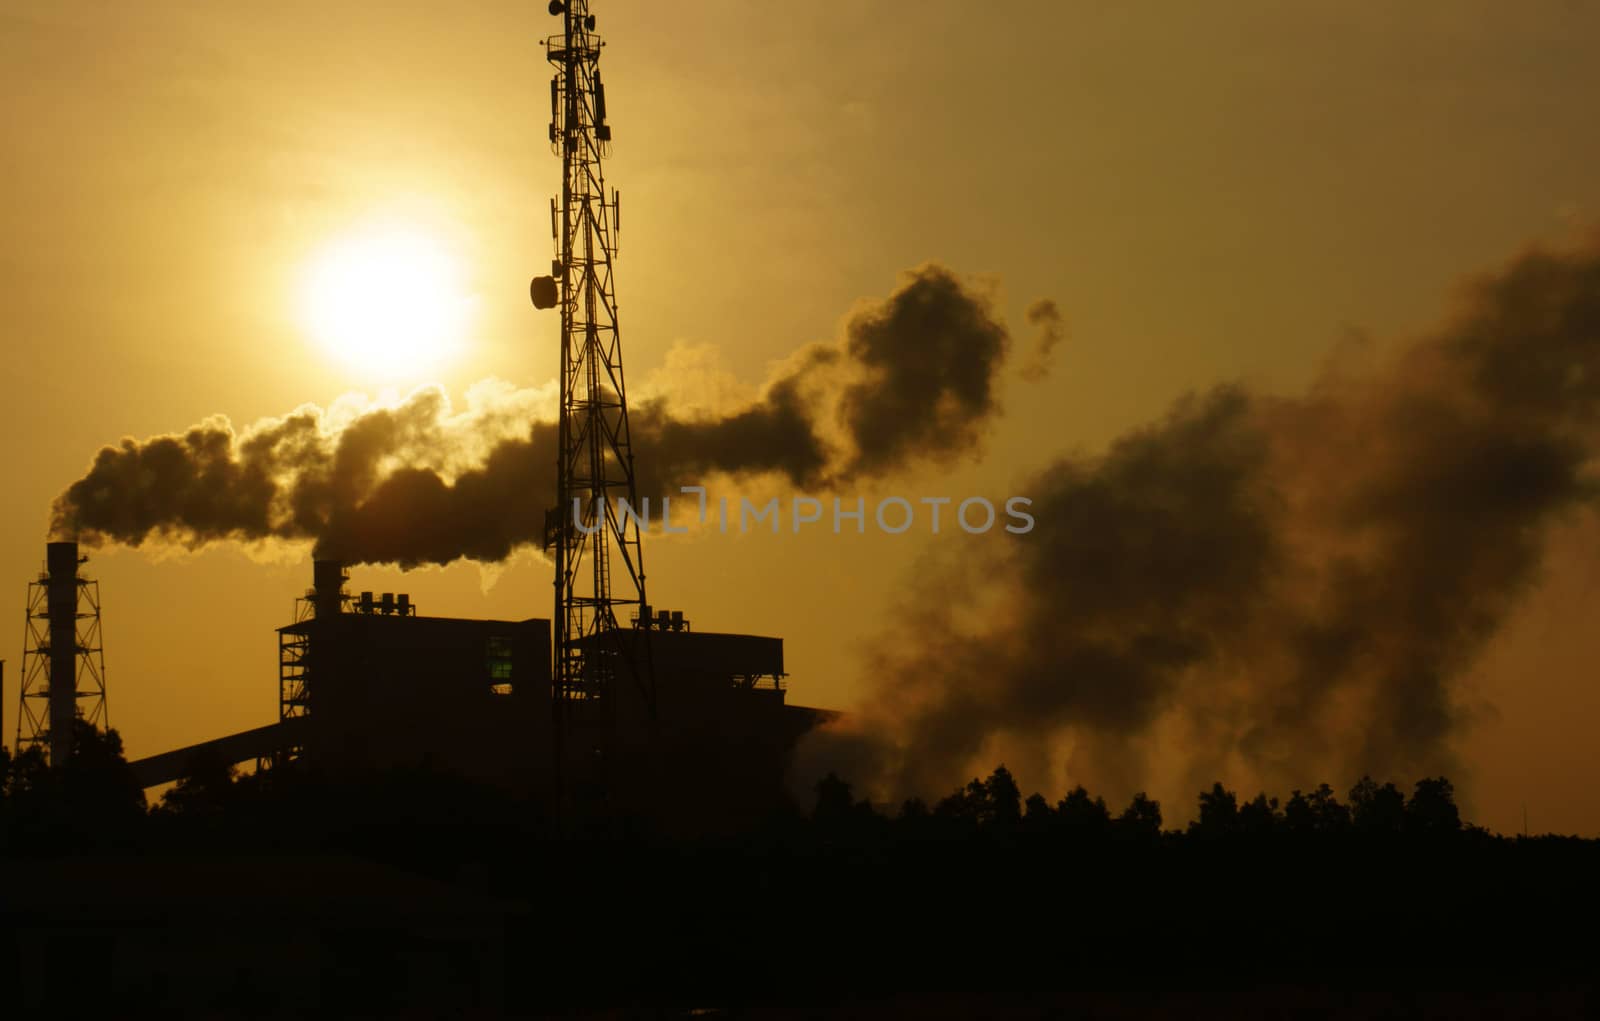 Black smoke from smoke stack of factory in industrial zone rose in to the air, it make polluted enviroment, the plant in silhouette at sunrise, atmosphere cover with waste exhaust